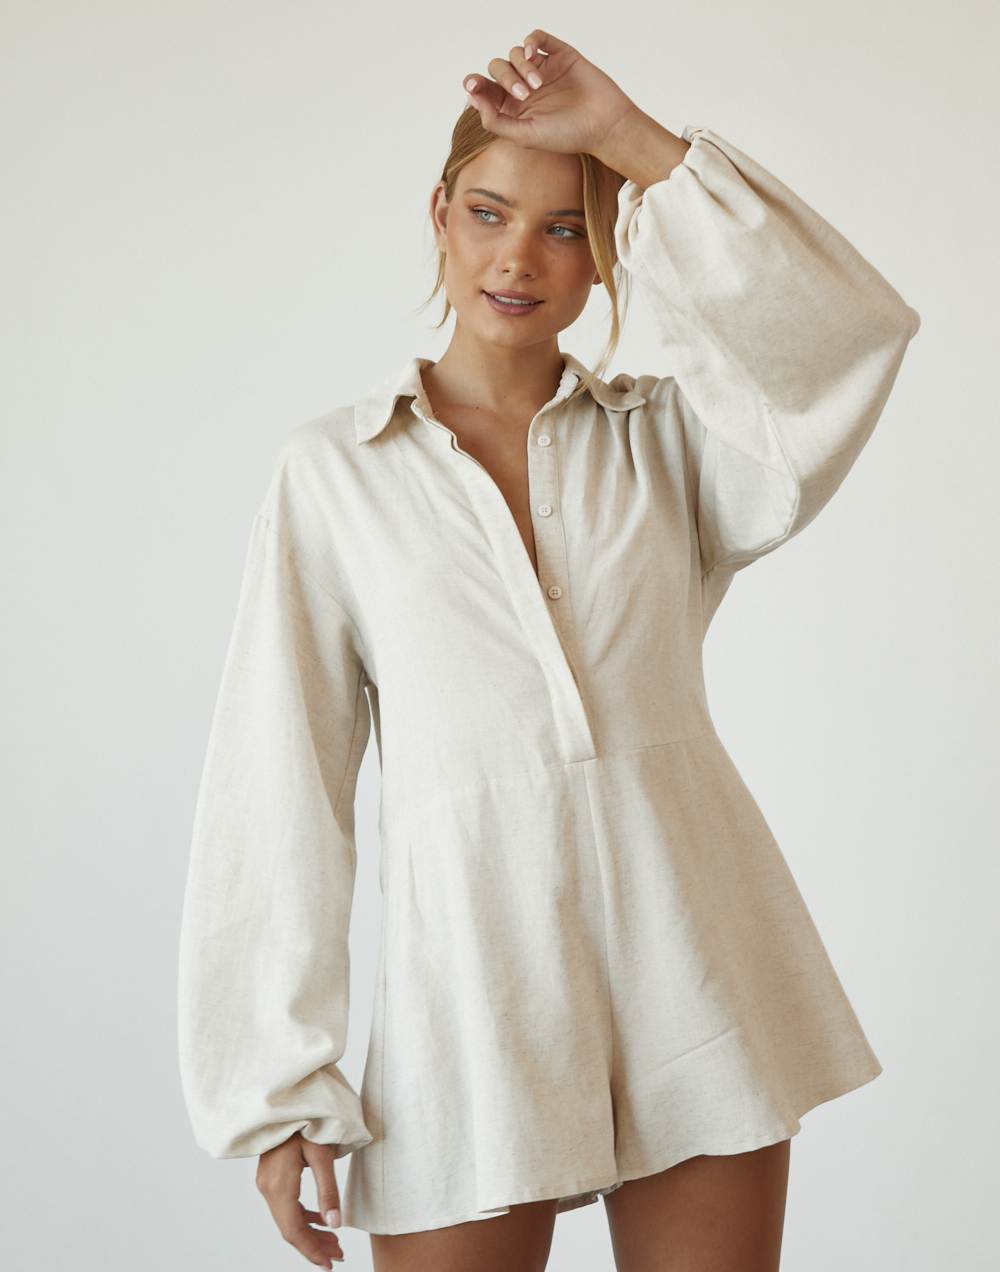 Take Your Time Playsuit (Beige) - Long Sleeved Linen Playsuit - Women's Playsuit - Charcoal Clothing